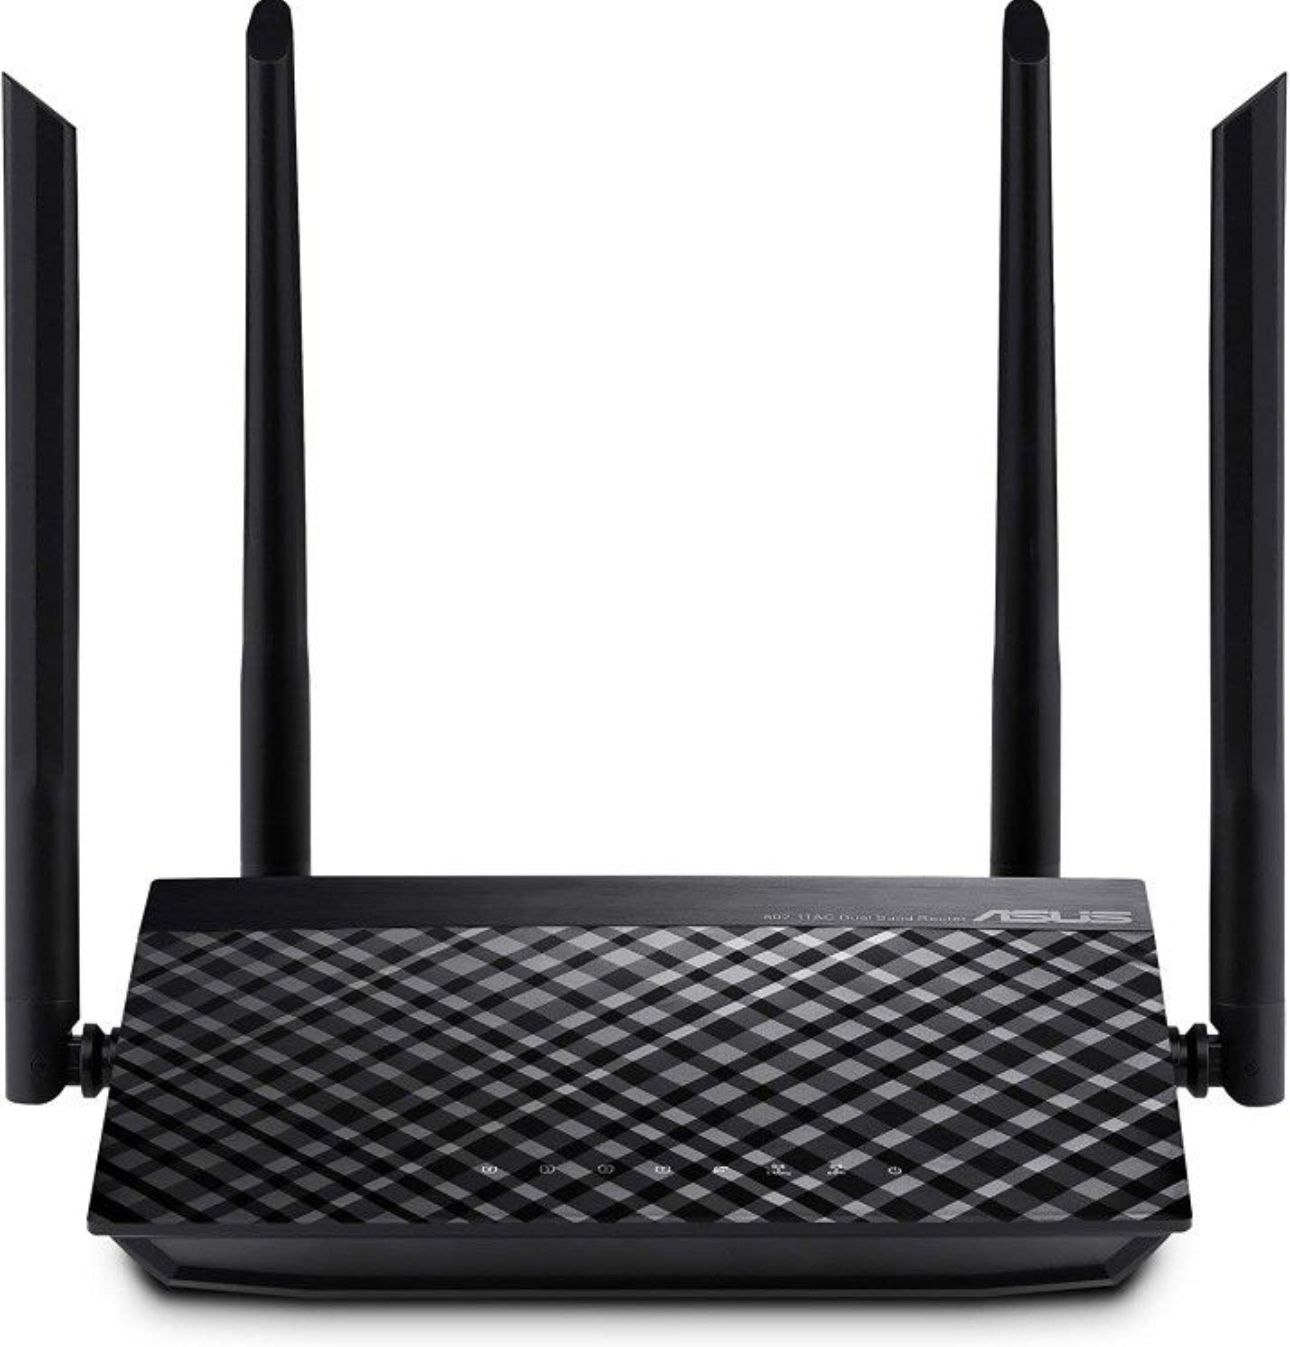 ASUS WiFi Router (RT-AC1200_V2) 